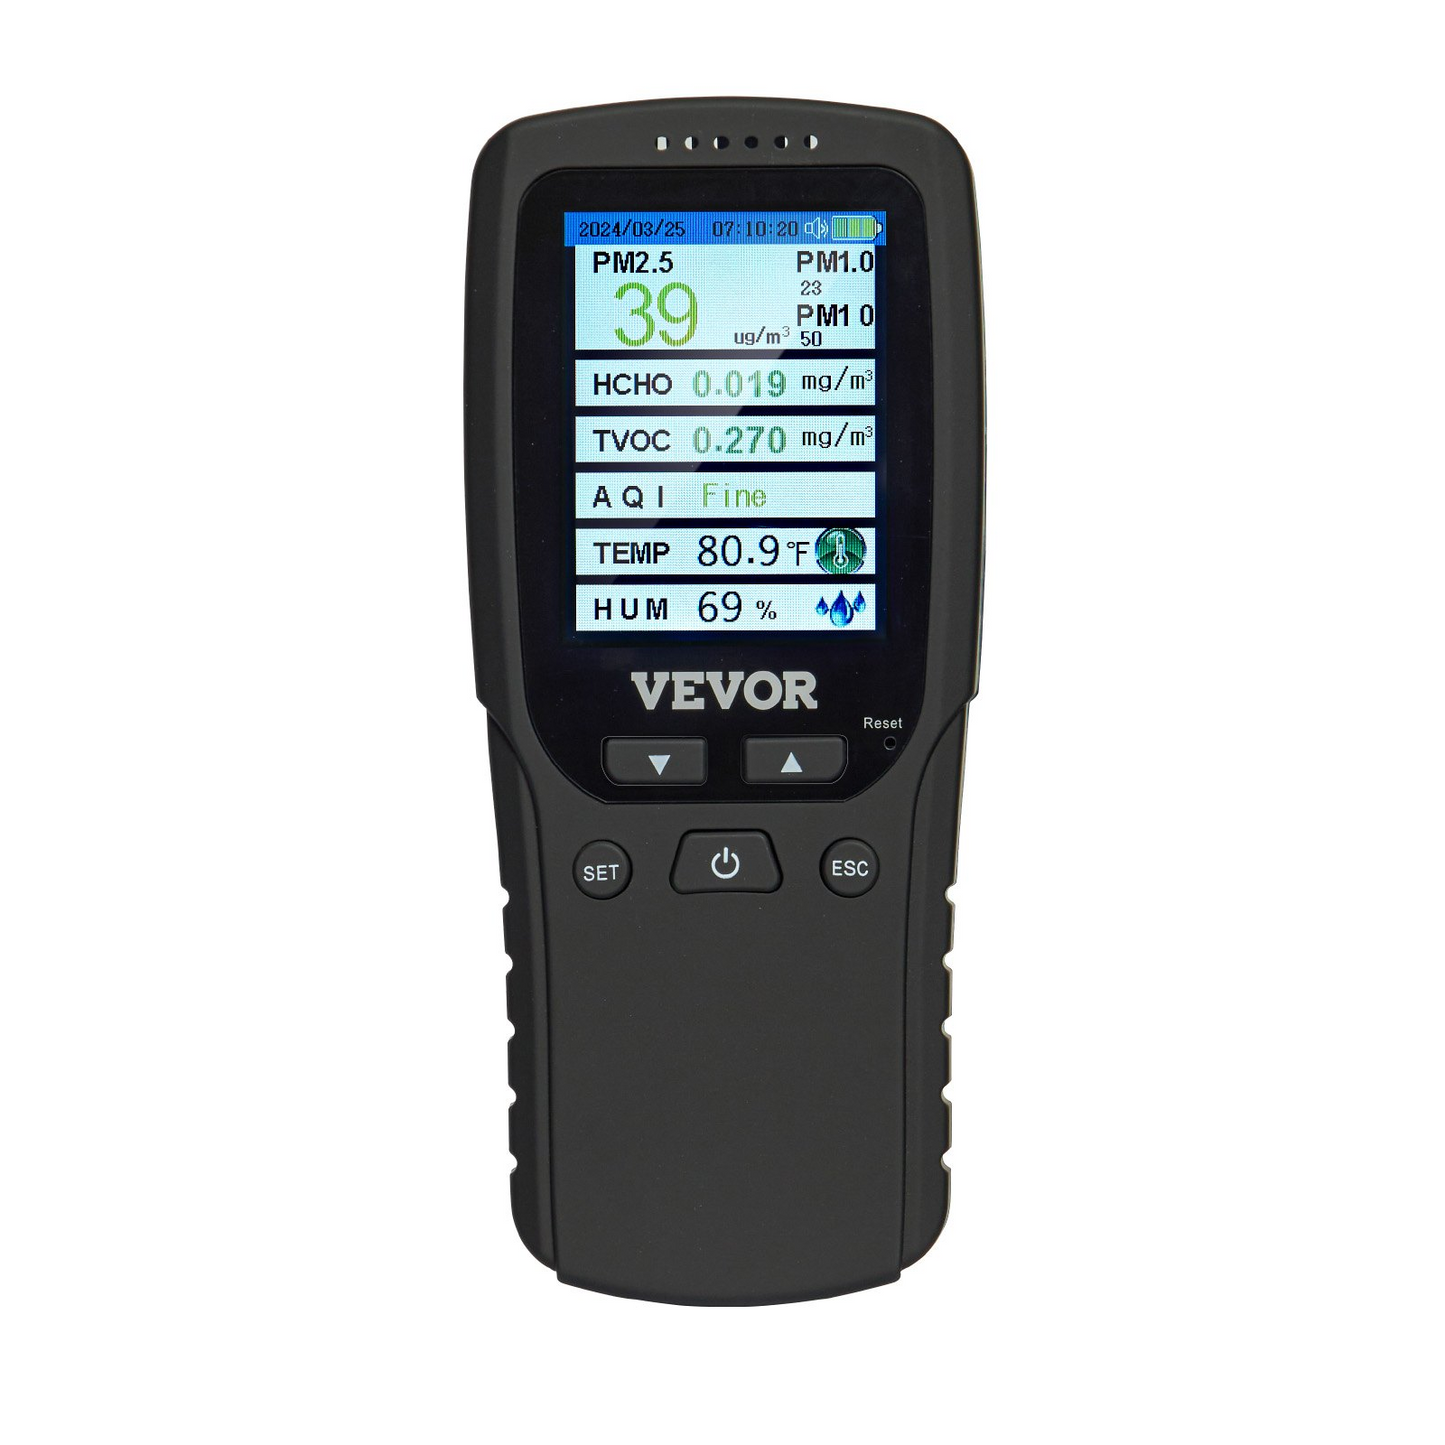 VEVOR Air Quality Monitor 8-IN-1, Professional PM2.5 PM10 PM1.0 Particle Counter, Formaldehyde, Temperature, Humidity, TVOC AQI Tester for Indoor/Outdoor, Air Quality Meter w/Alarm Thresholds